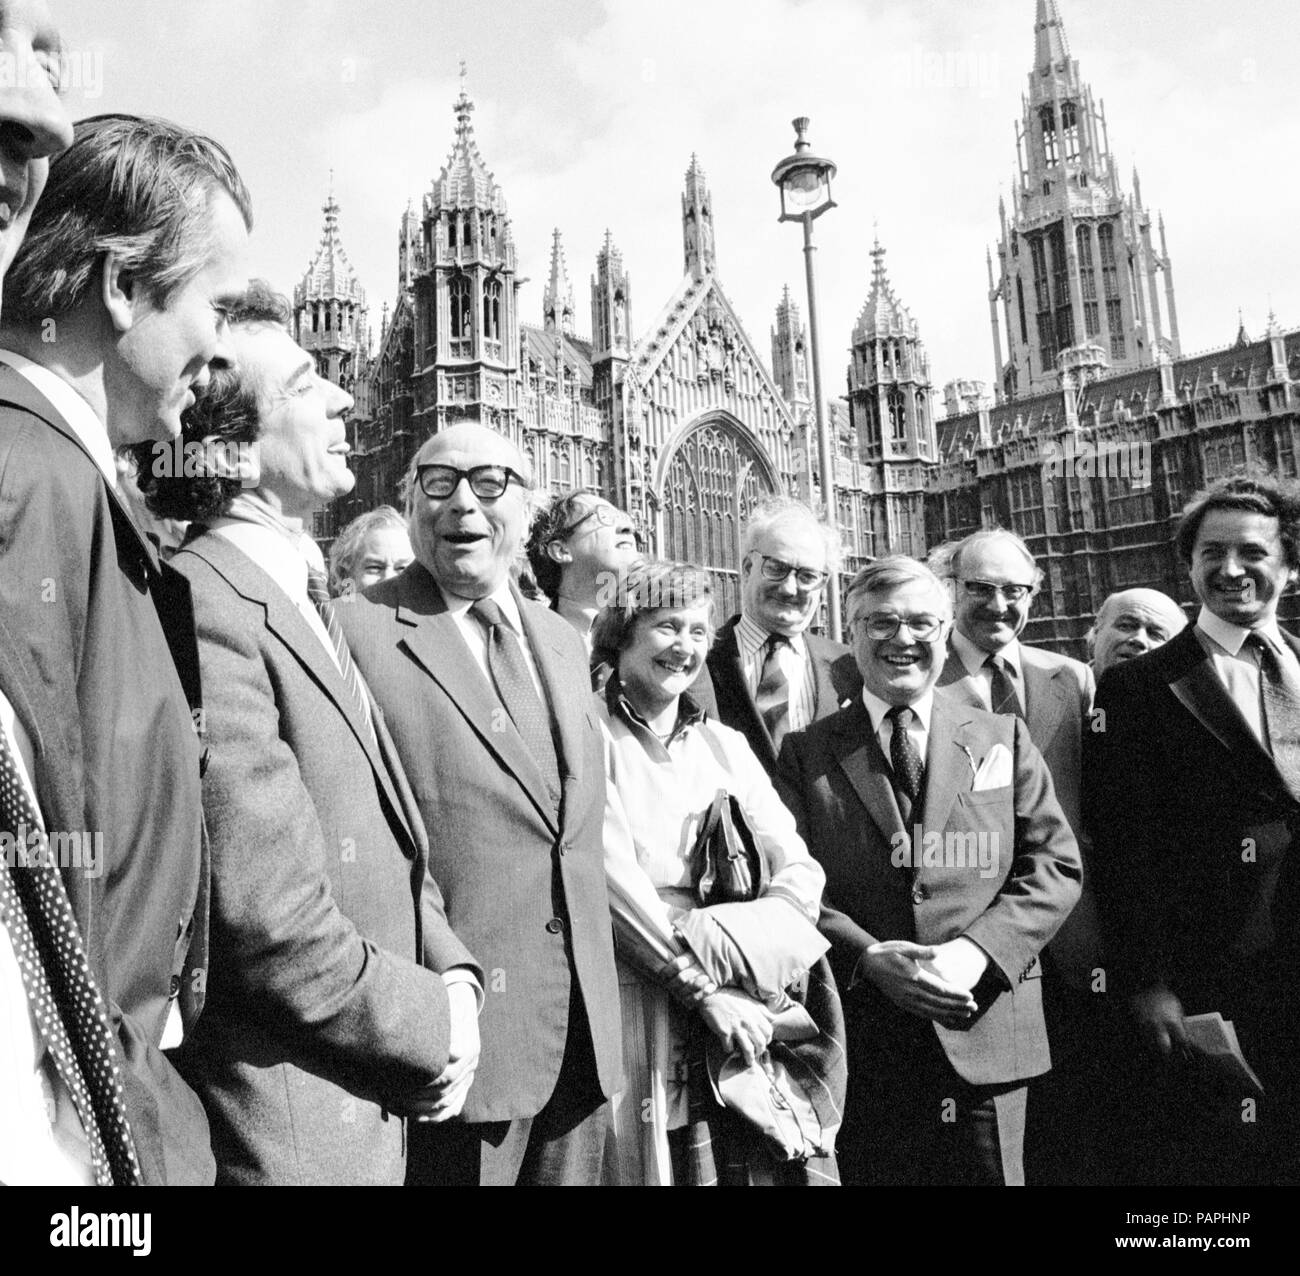 Flanked by co-founders of the SDP and surrounded by well-wishers, the Social Democratic Member of Parliament for Glasgow Hillhead, Mr Roy Jenkins (glasses, third left) arriving today to take up his seat in the Commons, won in last week's by-election. The co-founders (L-R) Dr David Owen, Mr William Rodgers, Mr Jenkins and Mrs Shirley Williams. Stock Photo